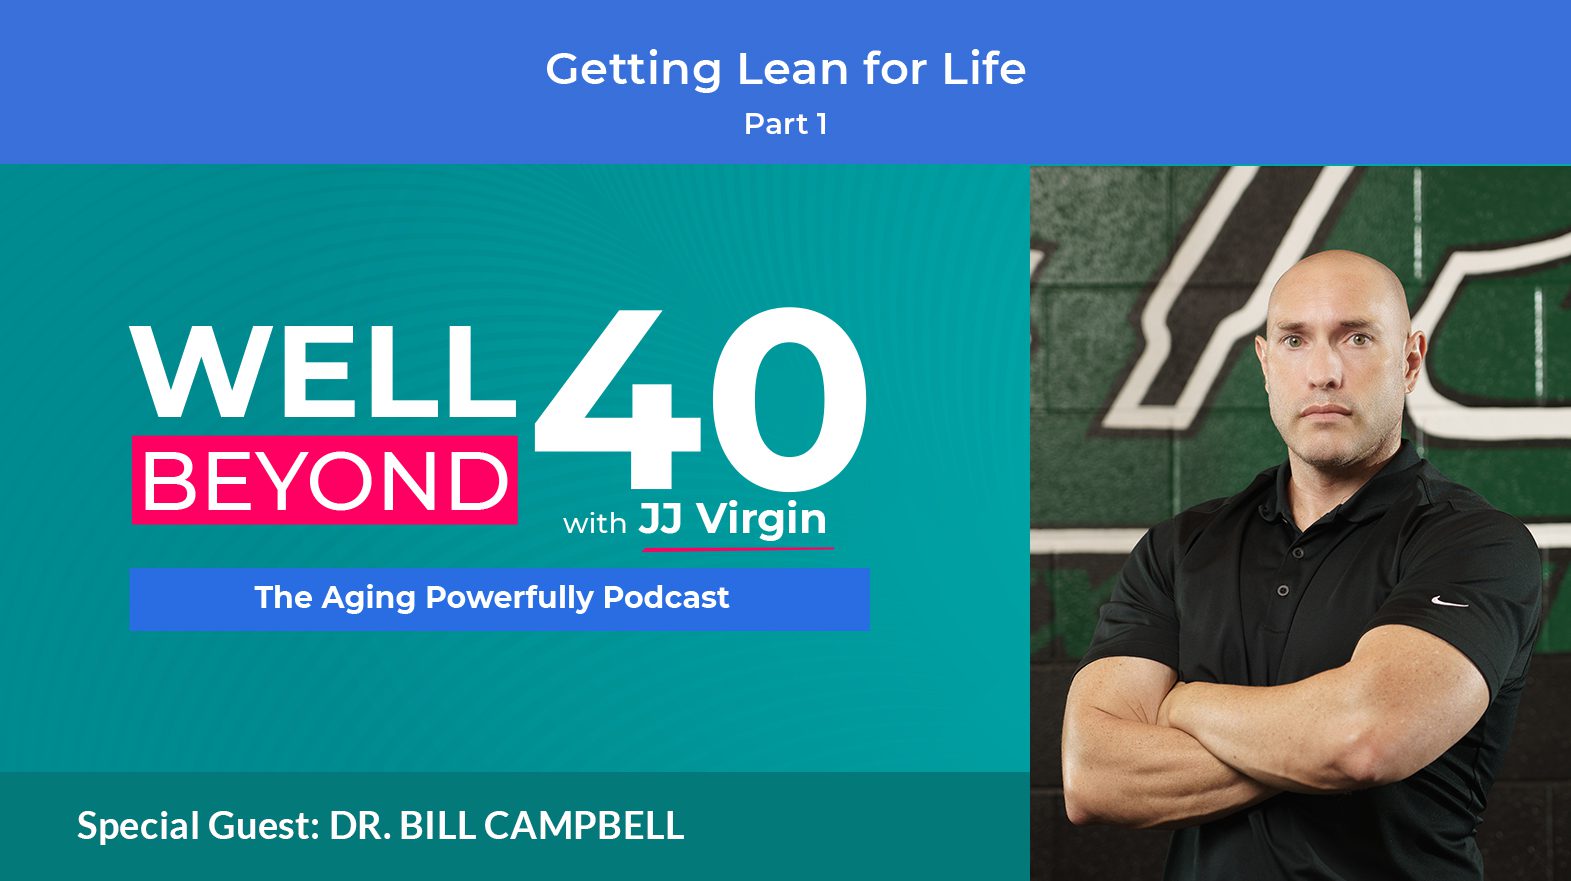 Getting Lean for Life with Dr. Bill Campbell: Part 1 | Ep. 631